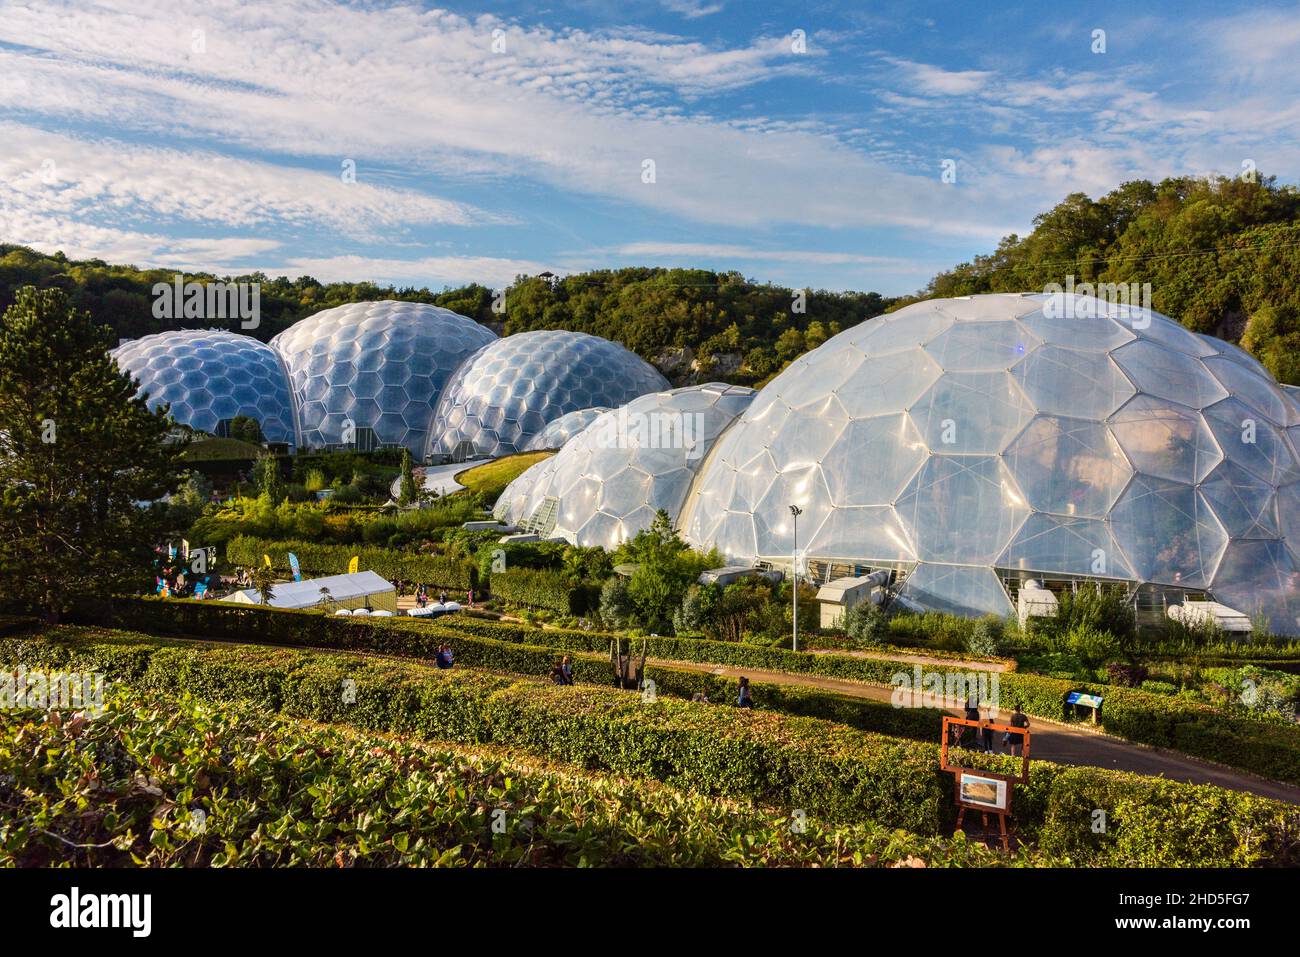 The stunning iconic biomes at the Eden Project in Cornwall. Stock Photo